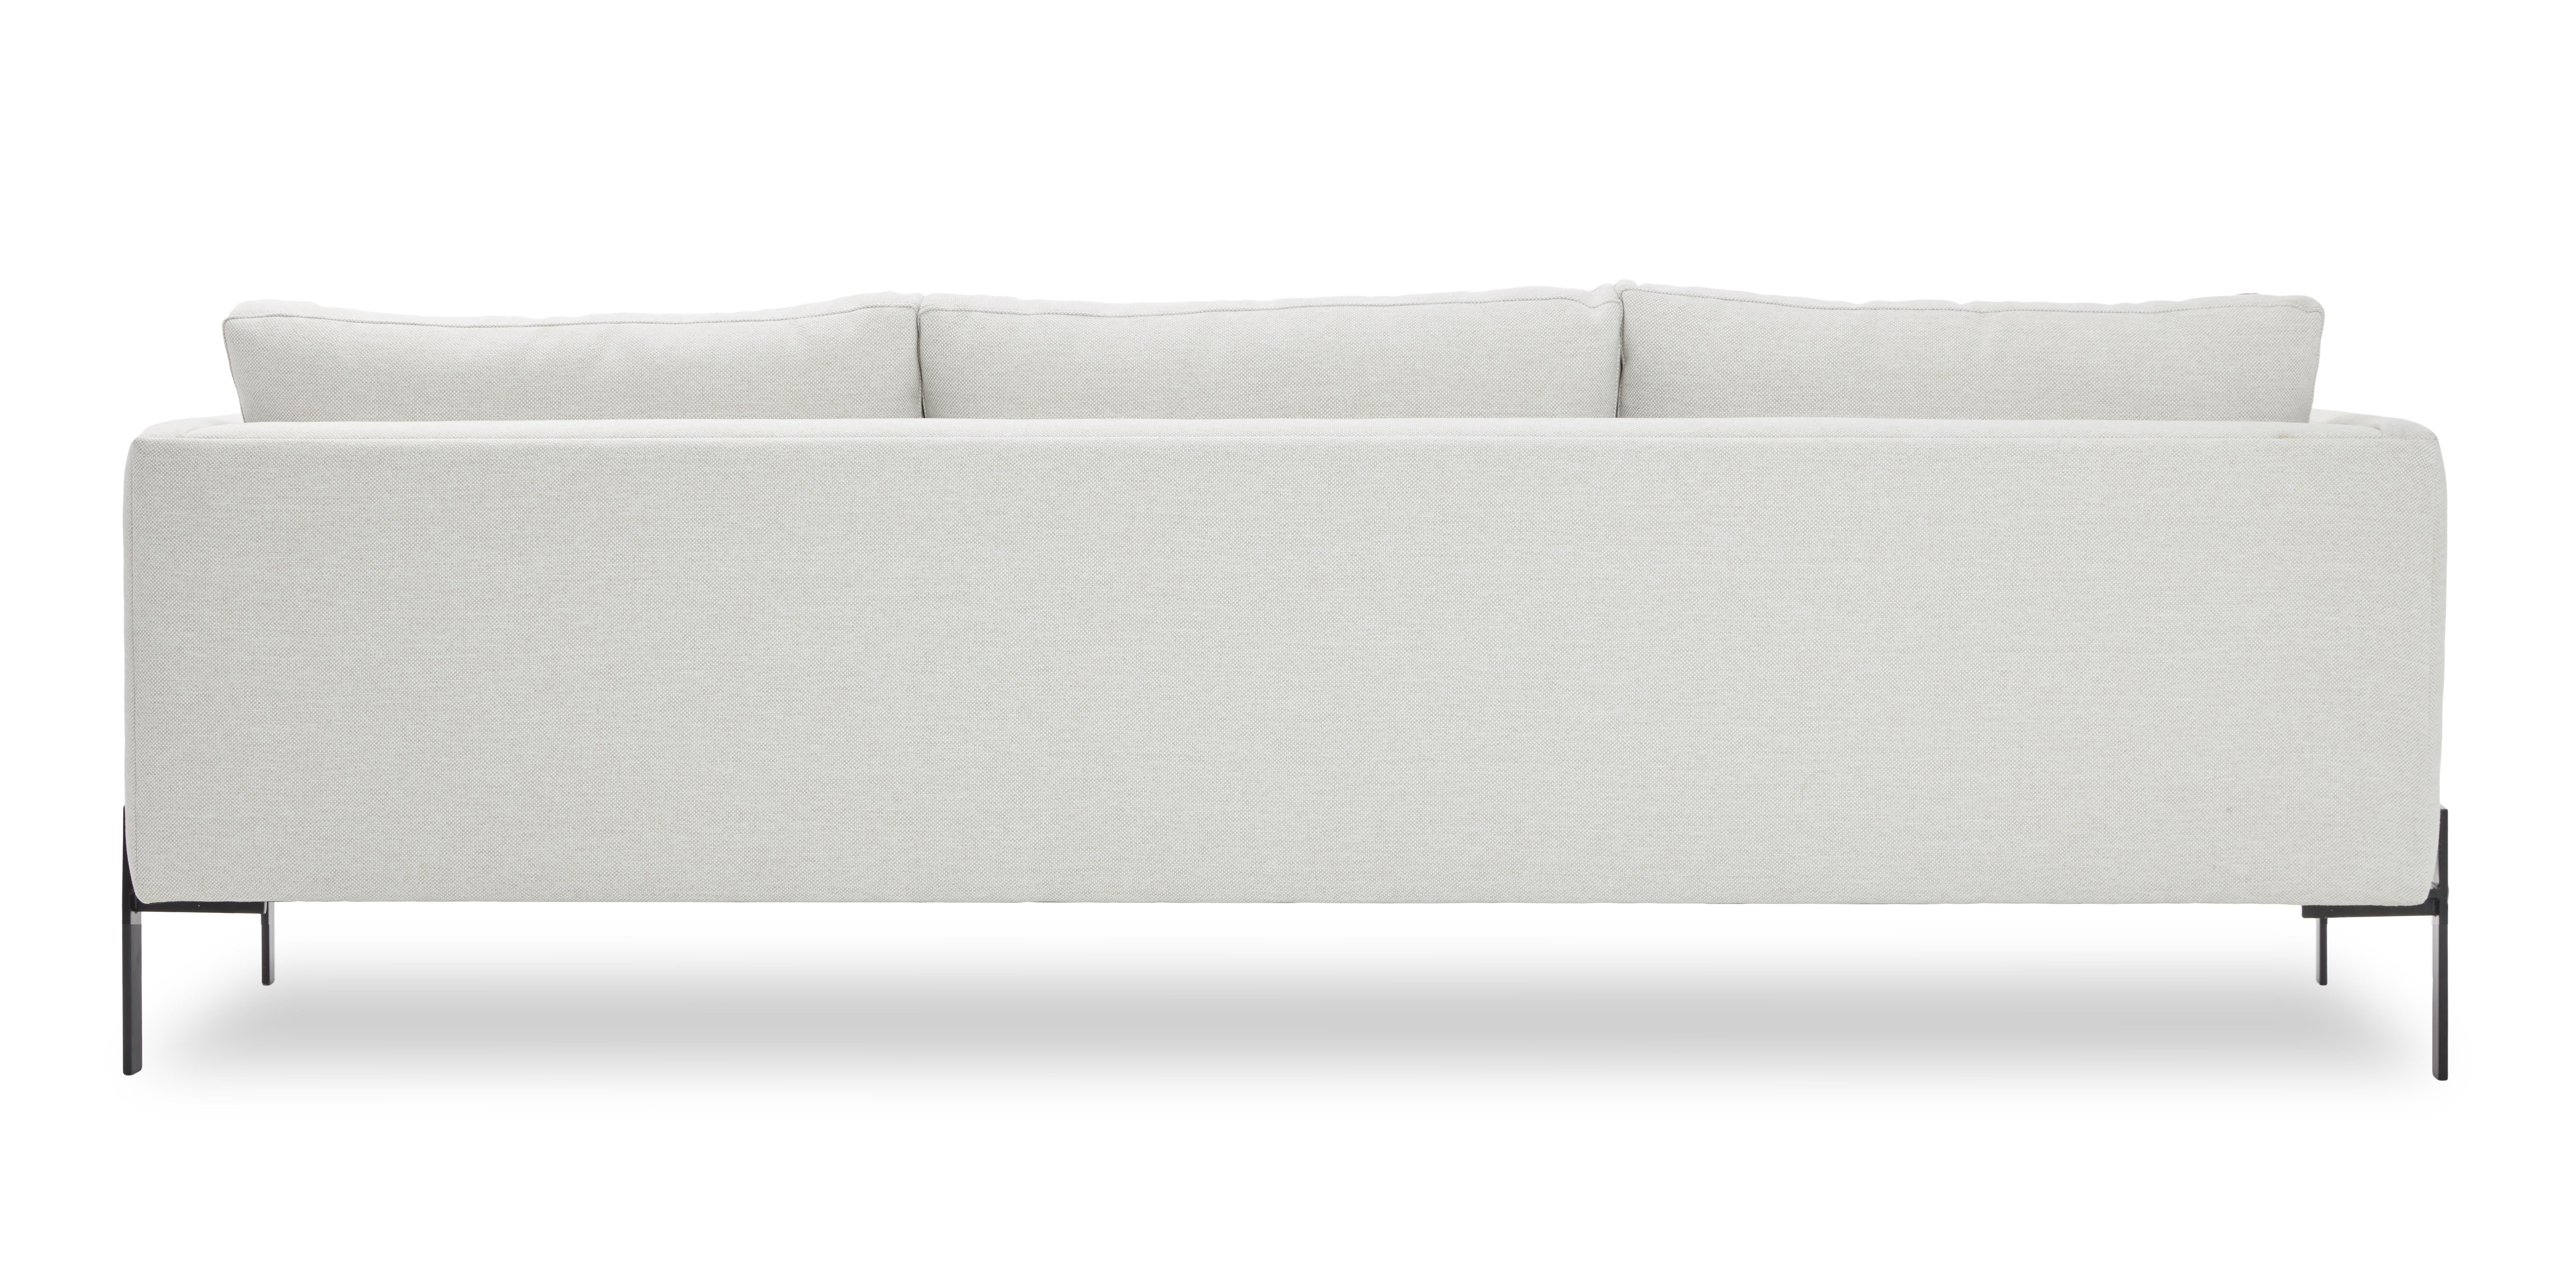 Modern Truss Sofa in Maharam Clavicle Fabric & Powder-Coated Steel by TRNK For Sale